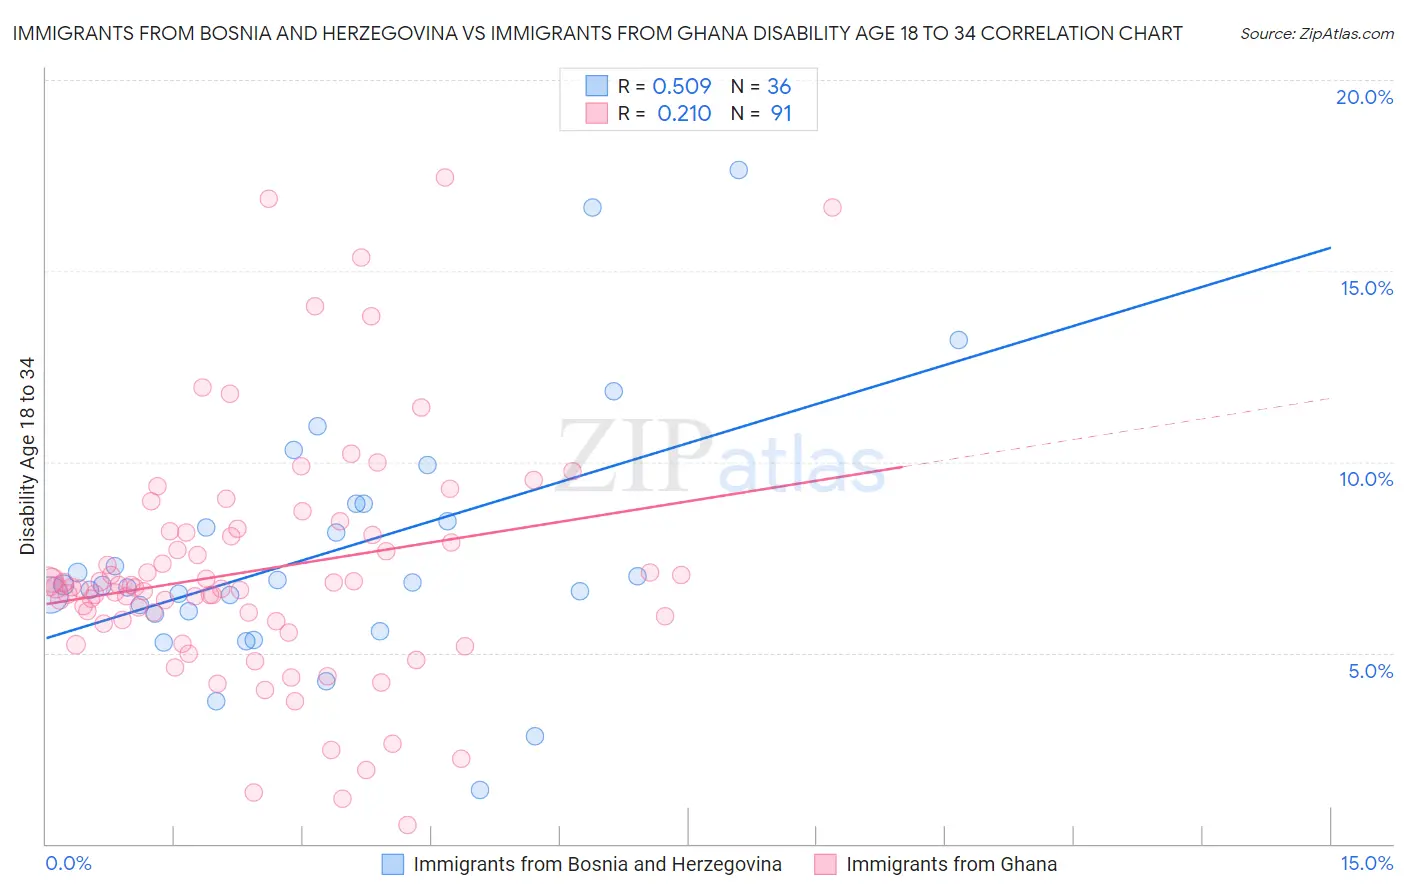 Immigrants from Bosnia and Herzegovina vs Immigrants from Ghana Disability Age 18 to 34